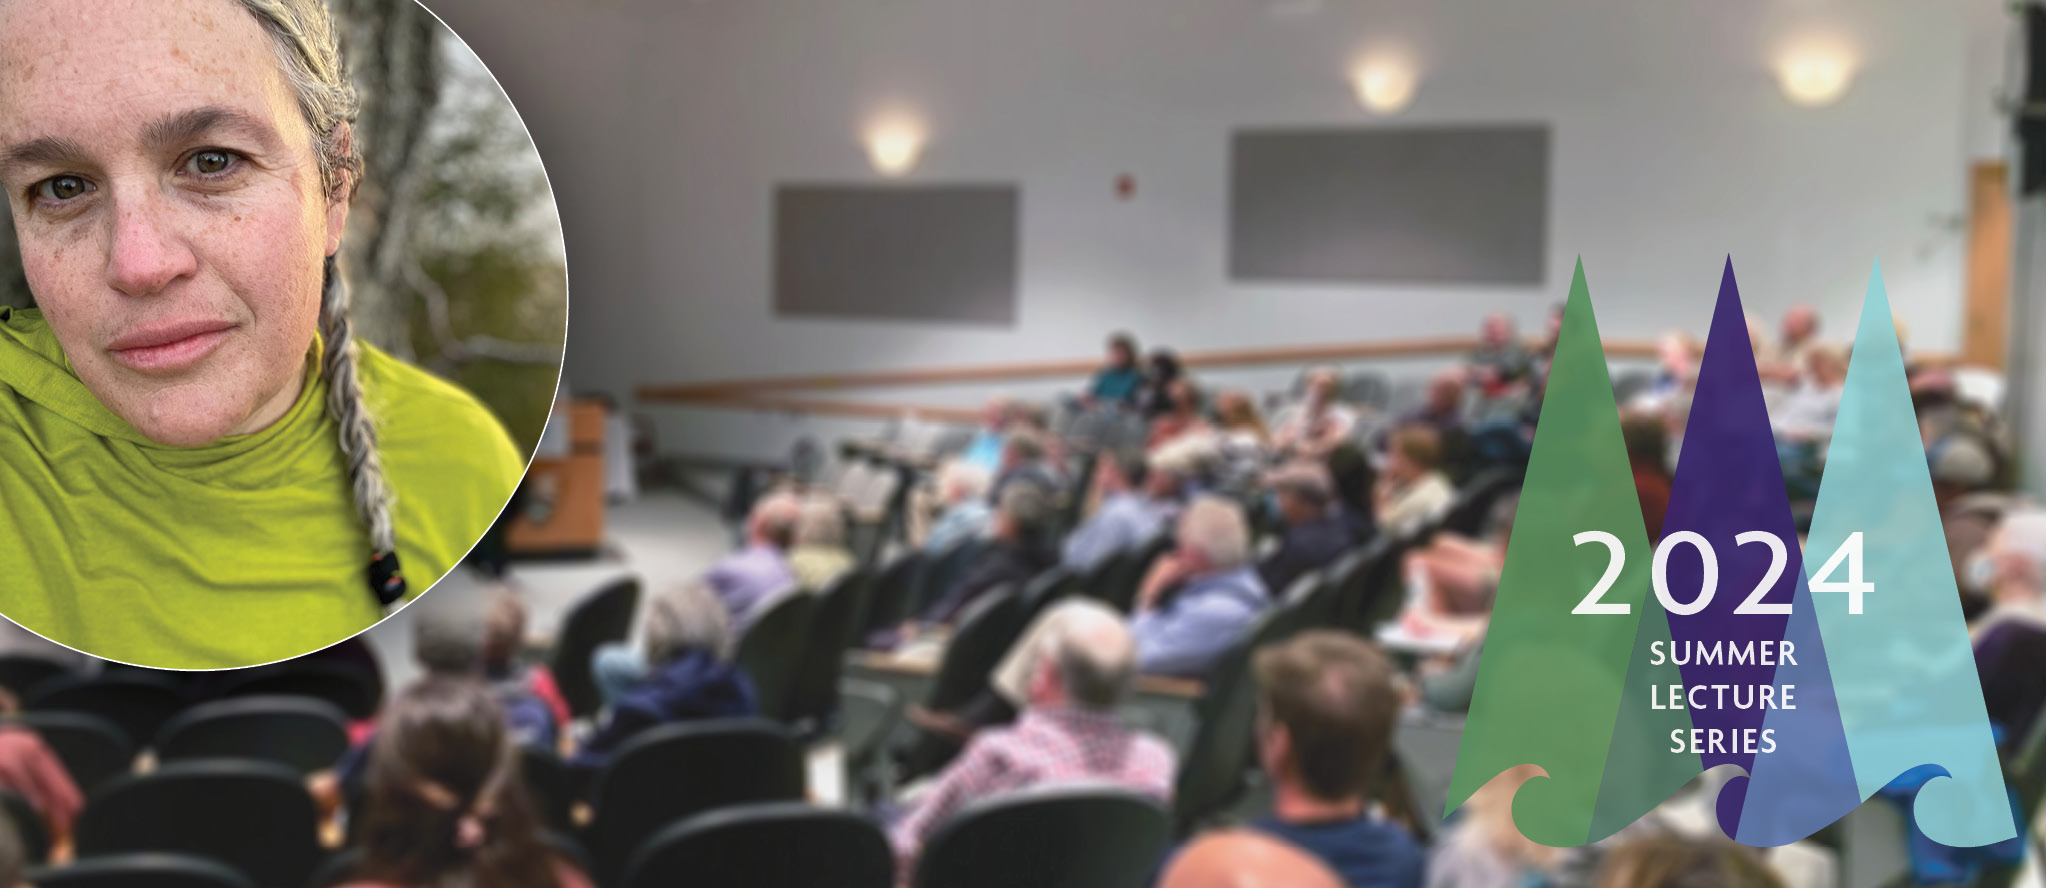 Banner image to promote an evening lecture showing (in the background) a crowded audience at Moore Auditorium on the Schoodic Institute campus, with a headshot of Libby Bischof overlaid on the left-hand side. On the right-hand side is the artwork of Schoodic Institute's logo, with overlaid text reading '2024 Summer Lecture Series'.